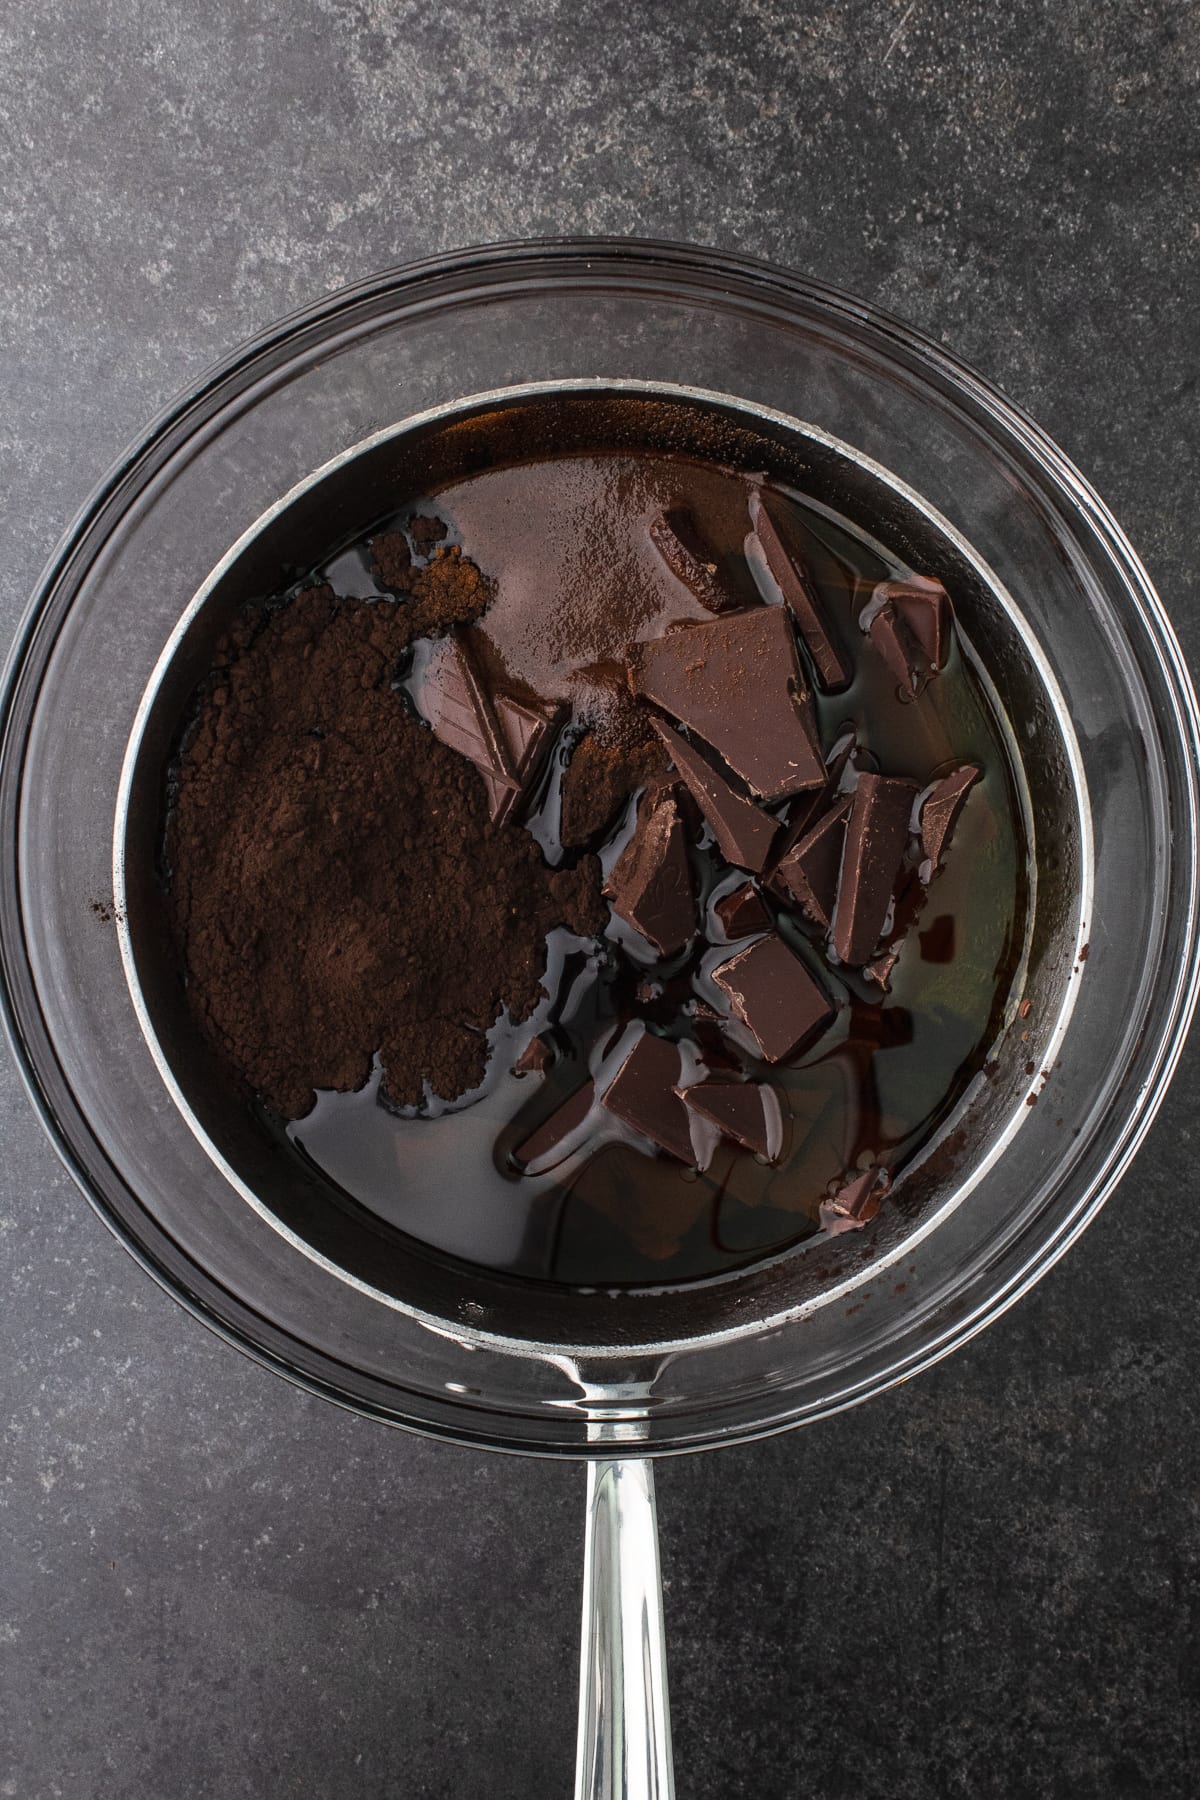 Chocolate, cocoa powder, espresso powder and olive oil in a glass bowl over a saucepan of simmering water